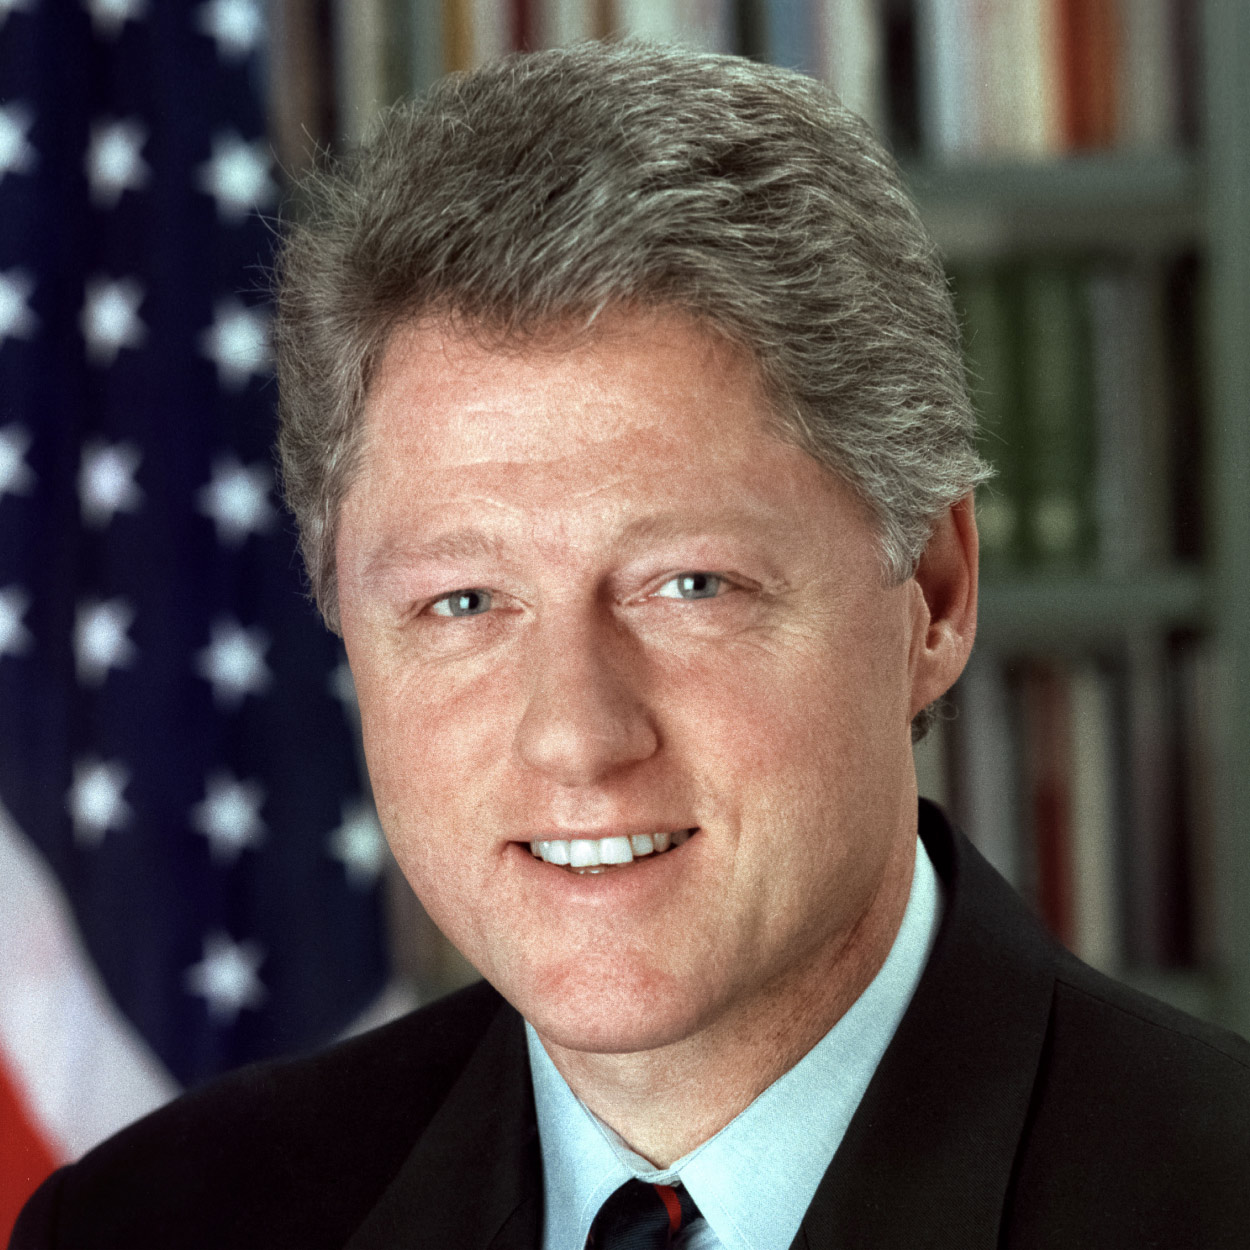 Portrait of William J. Clinton, the 42nd President of the United States